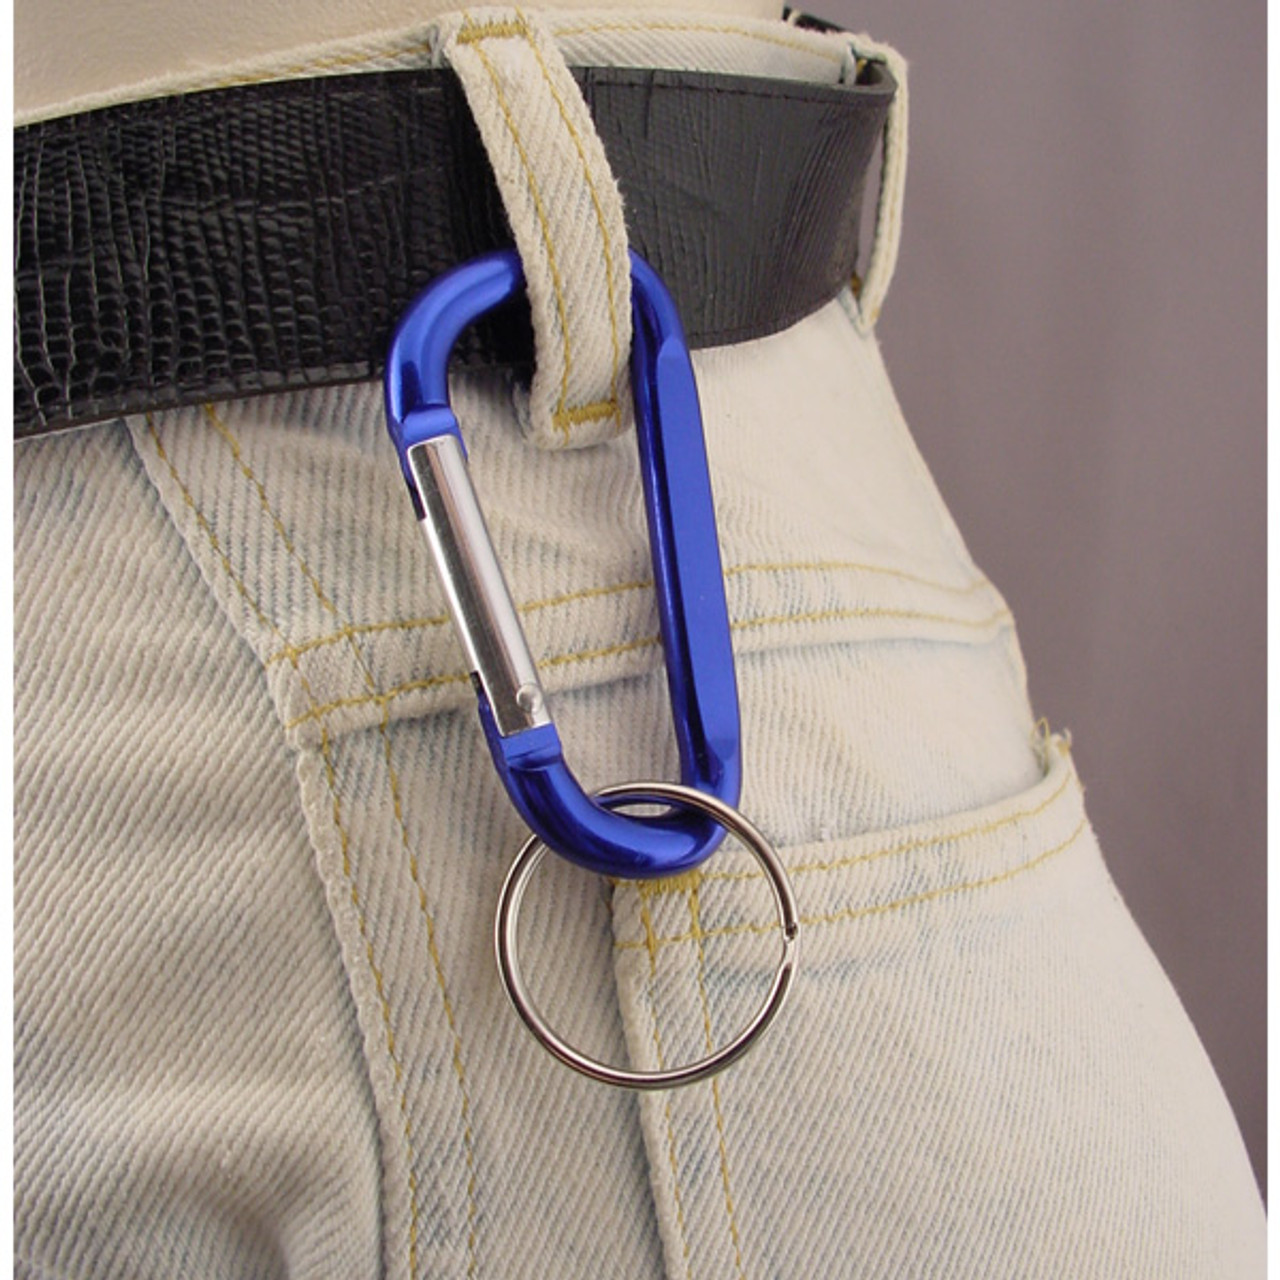 Shop for and Buy Large Carabiner Keychain at . Large selection  and bulk discounts available.